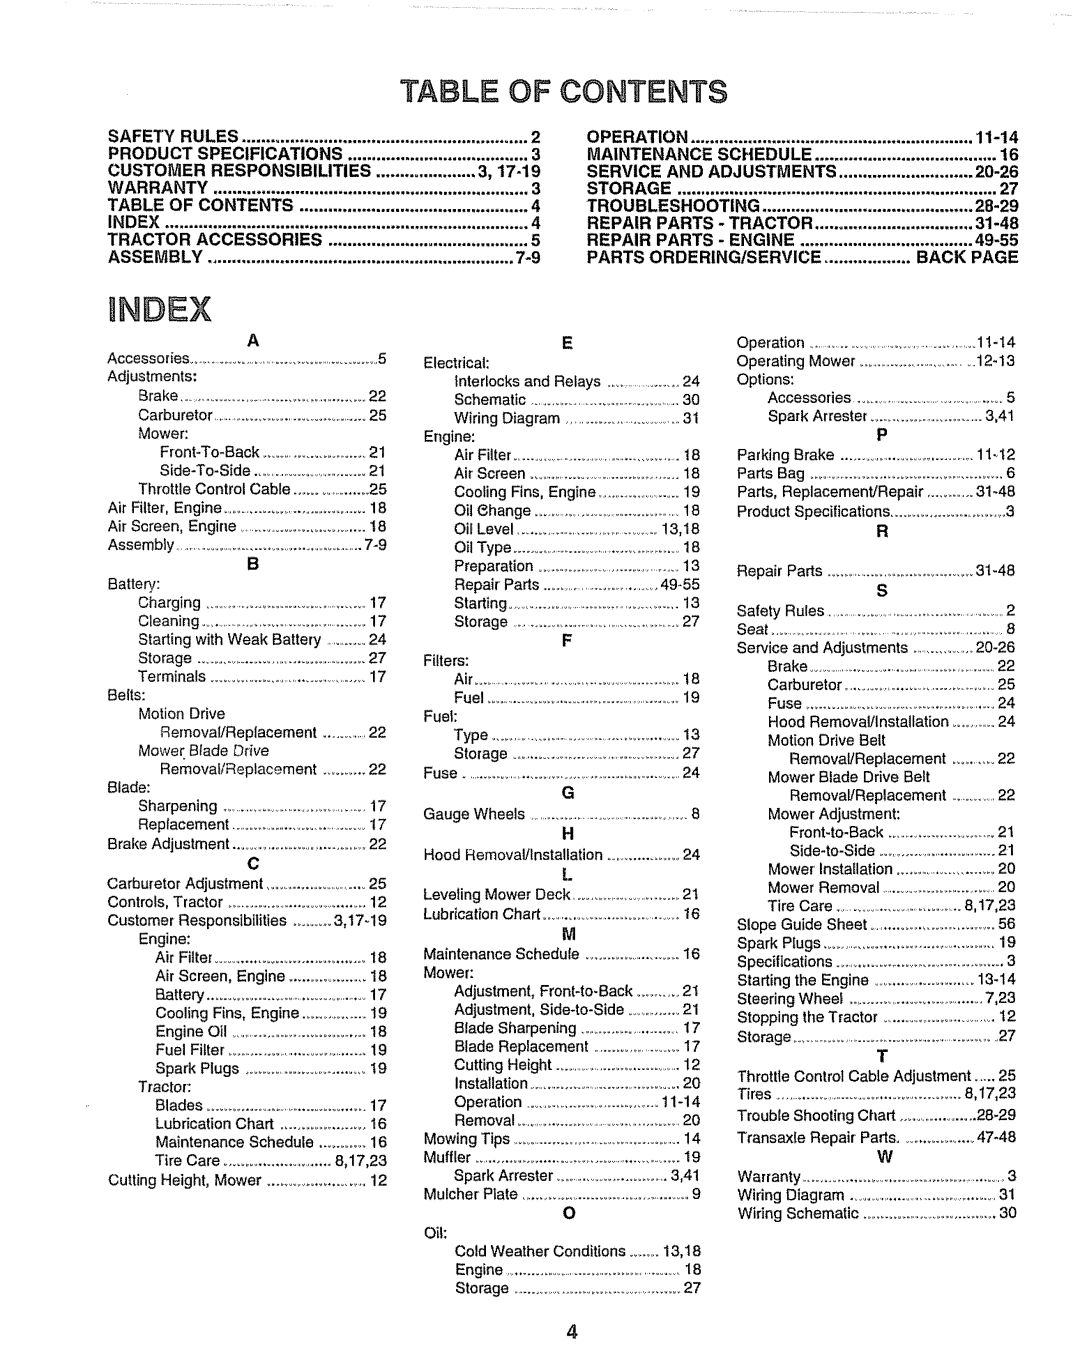 Craftsman 917.259172 Undex, Table Of Contents, Safety Rules, Operation, 11-14, Product Specifications, Service, 20-26 